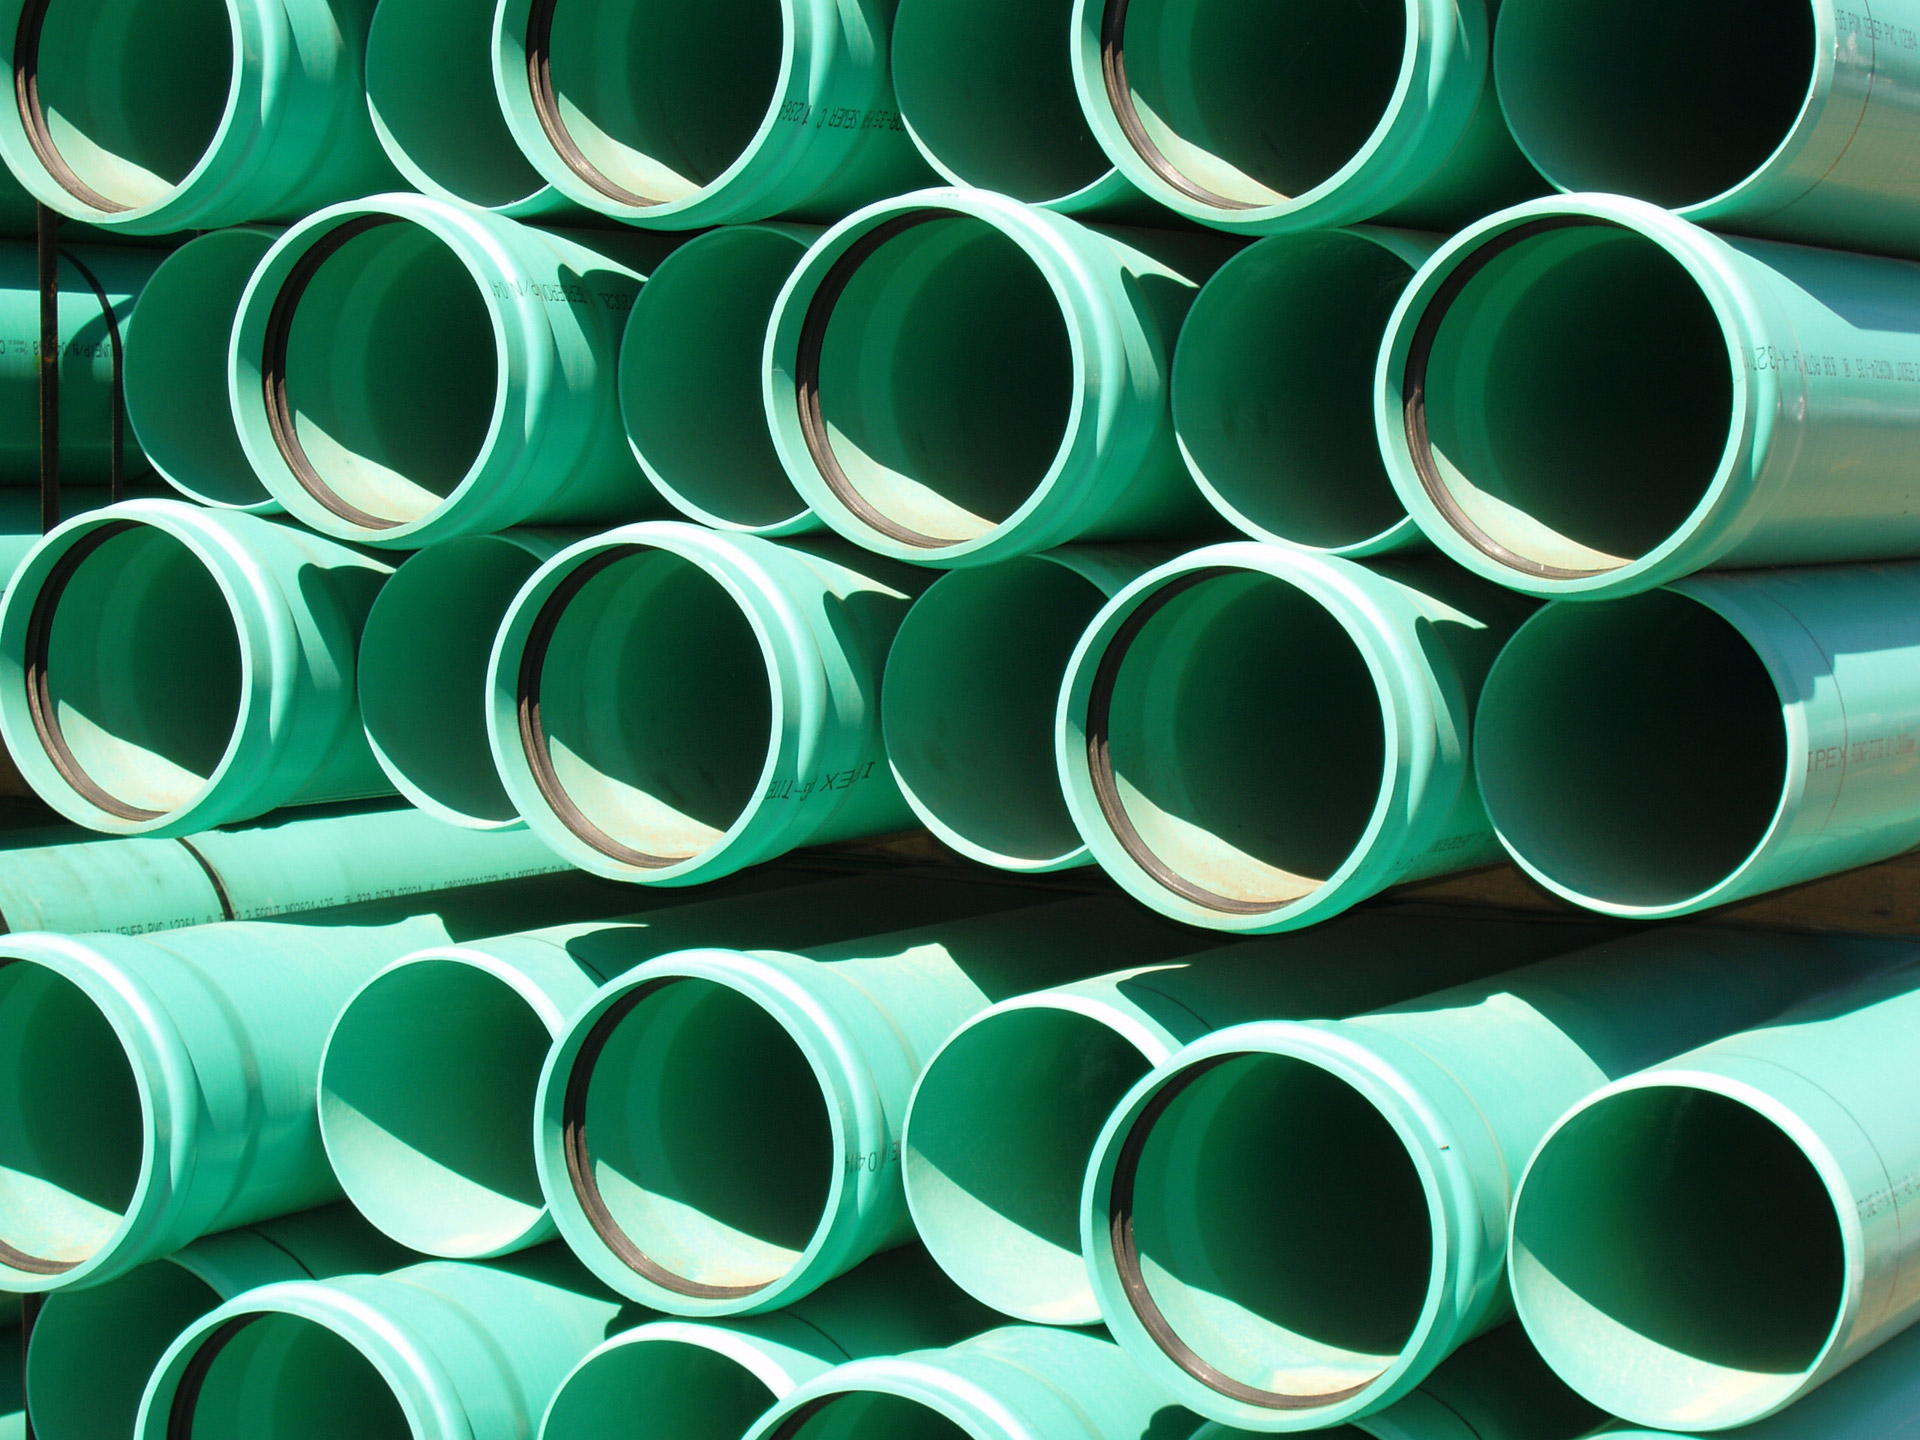 Green culvert pipes ready to be buried